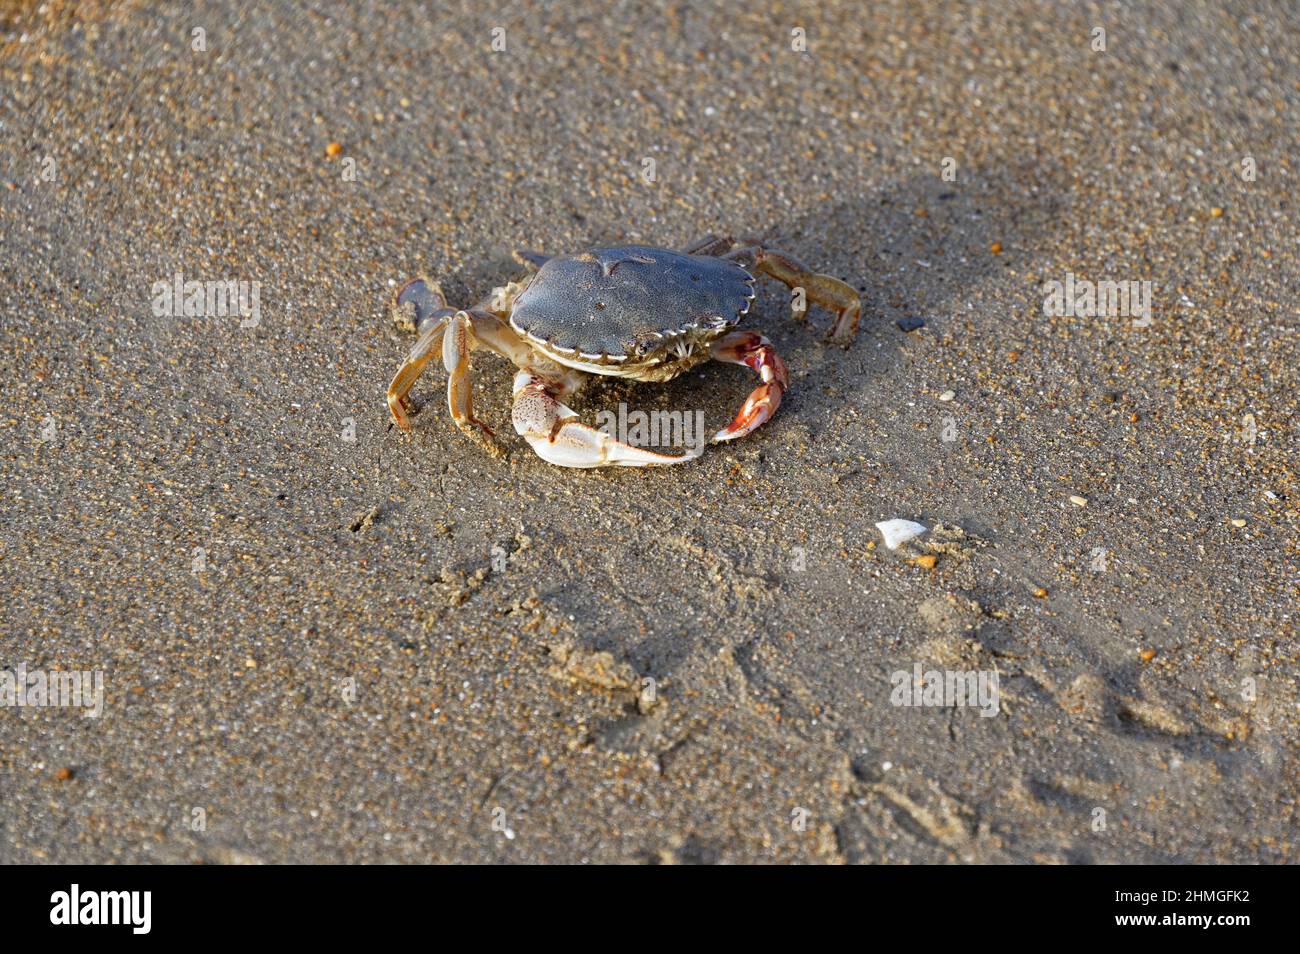 This crab is exposed on the beach, an easy meal for passing sea gulls. Stock Photo